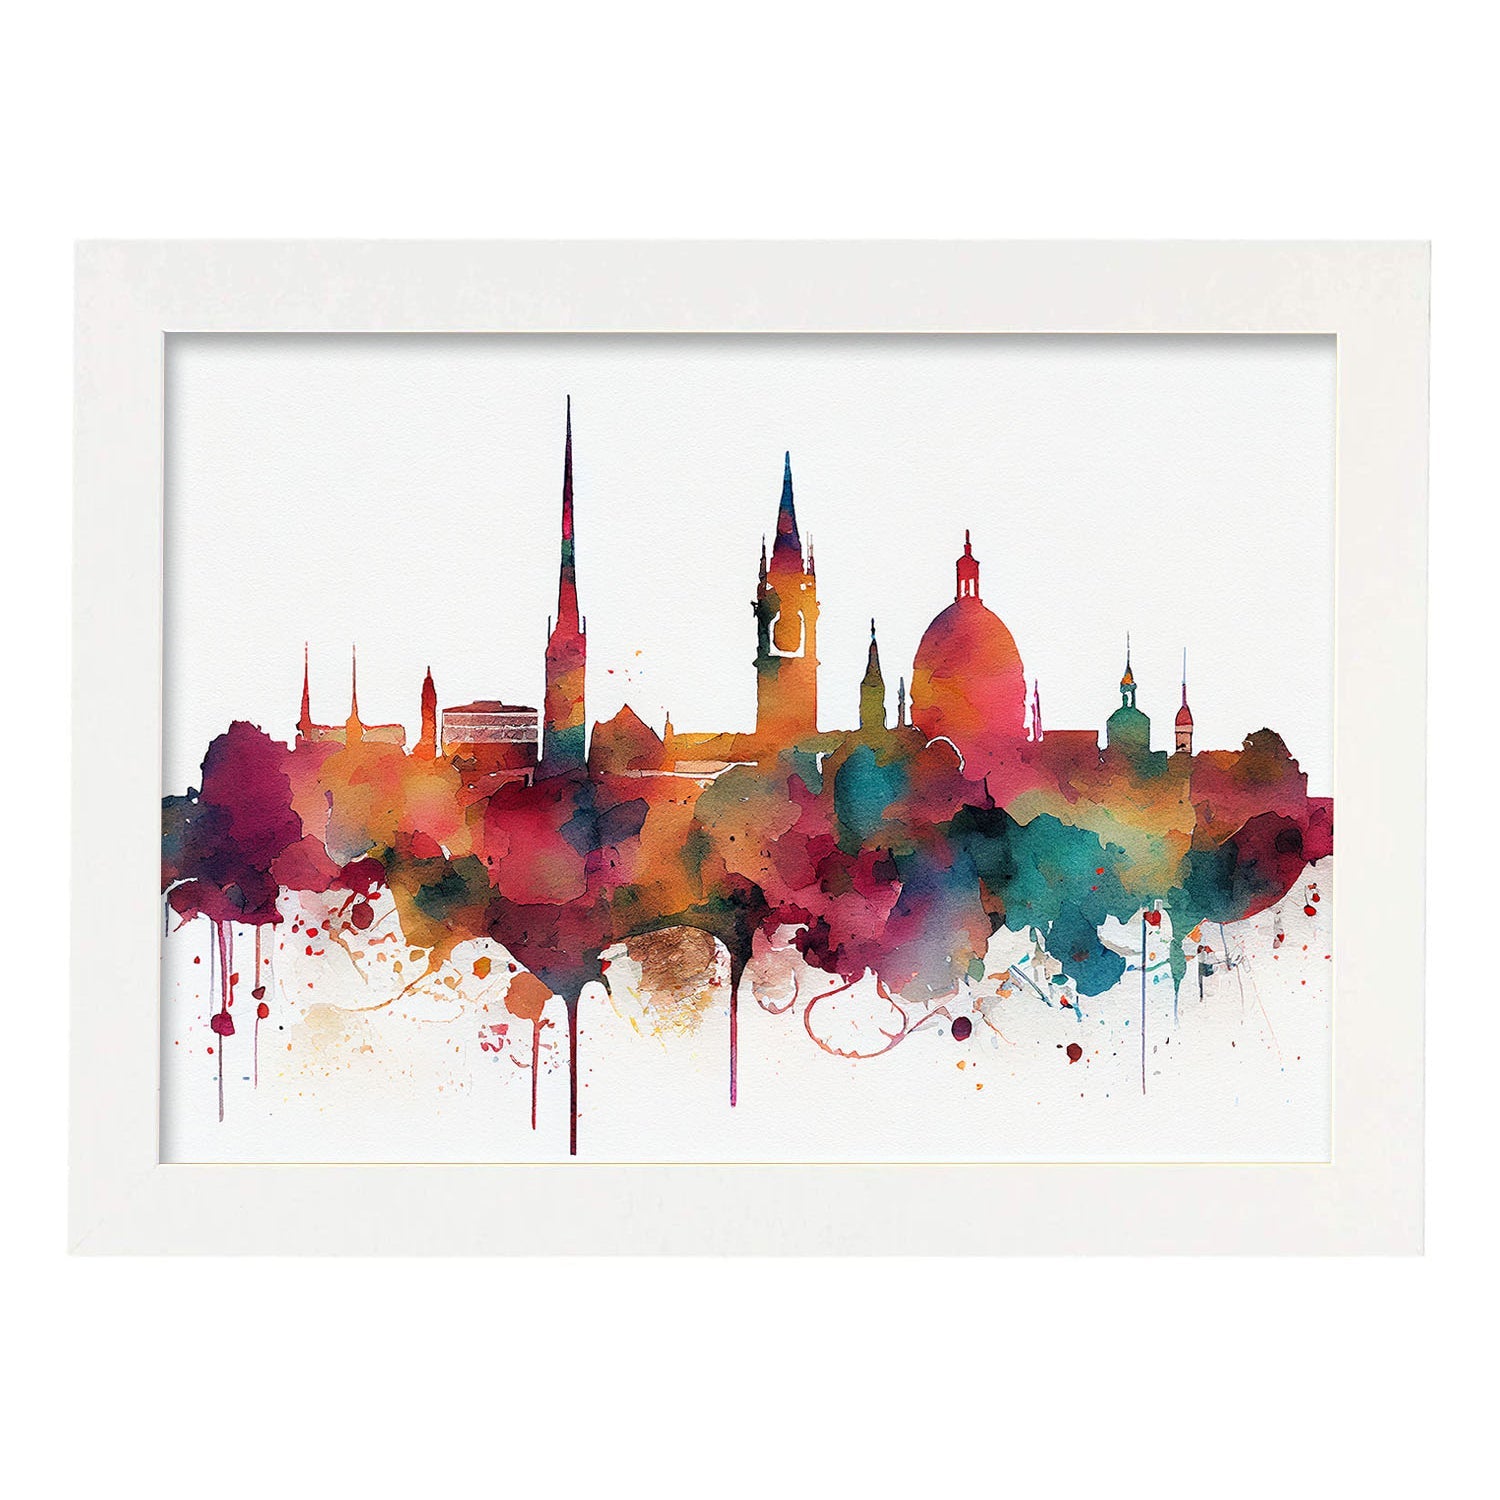 Nacnic watercolor of a skyline of the city of Stuttgart. Aesthetic Wall Art Prints for Bedroom or Living Room Design.-Artwork-Nacnic-A4-Marco Blanco-Nacnic Estudio SL